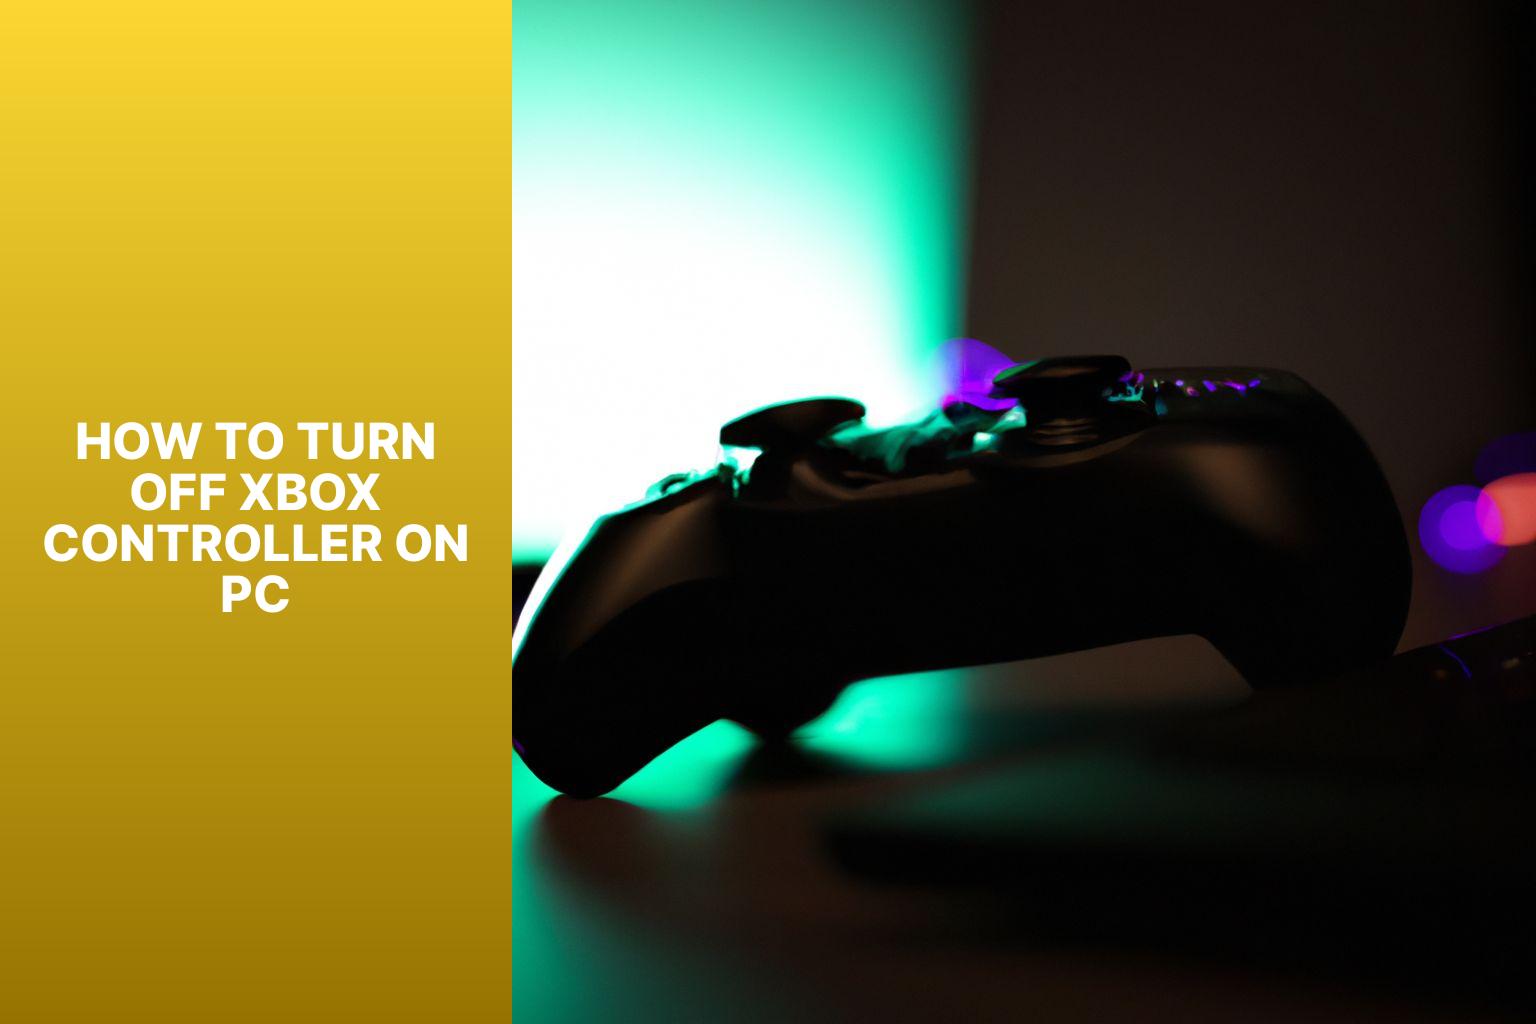 How to turn off Xbox controller on PC